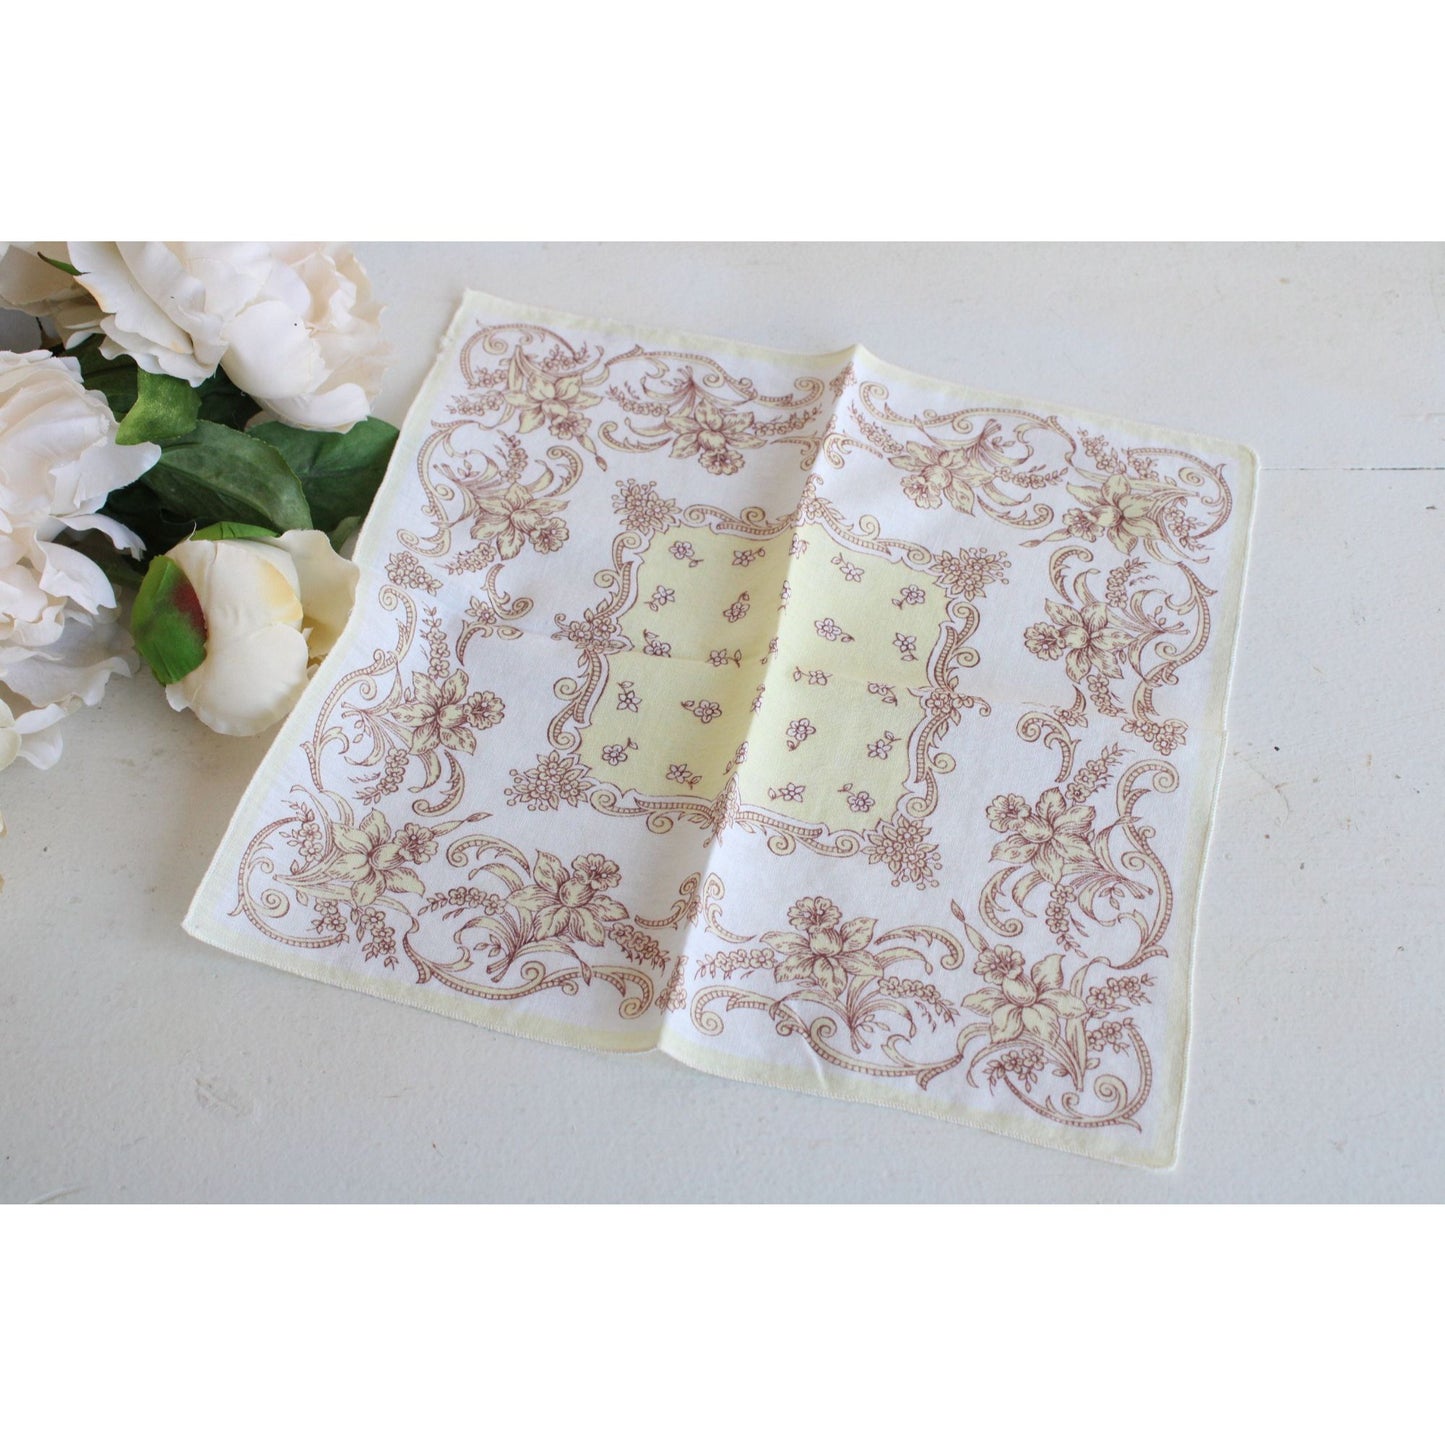 Vintage Cotton Yellow with Brown Floral Print Hanky